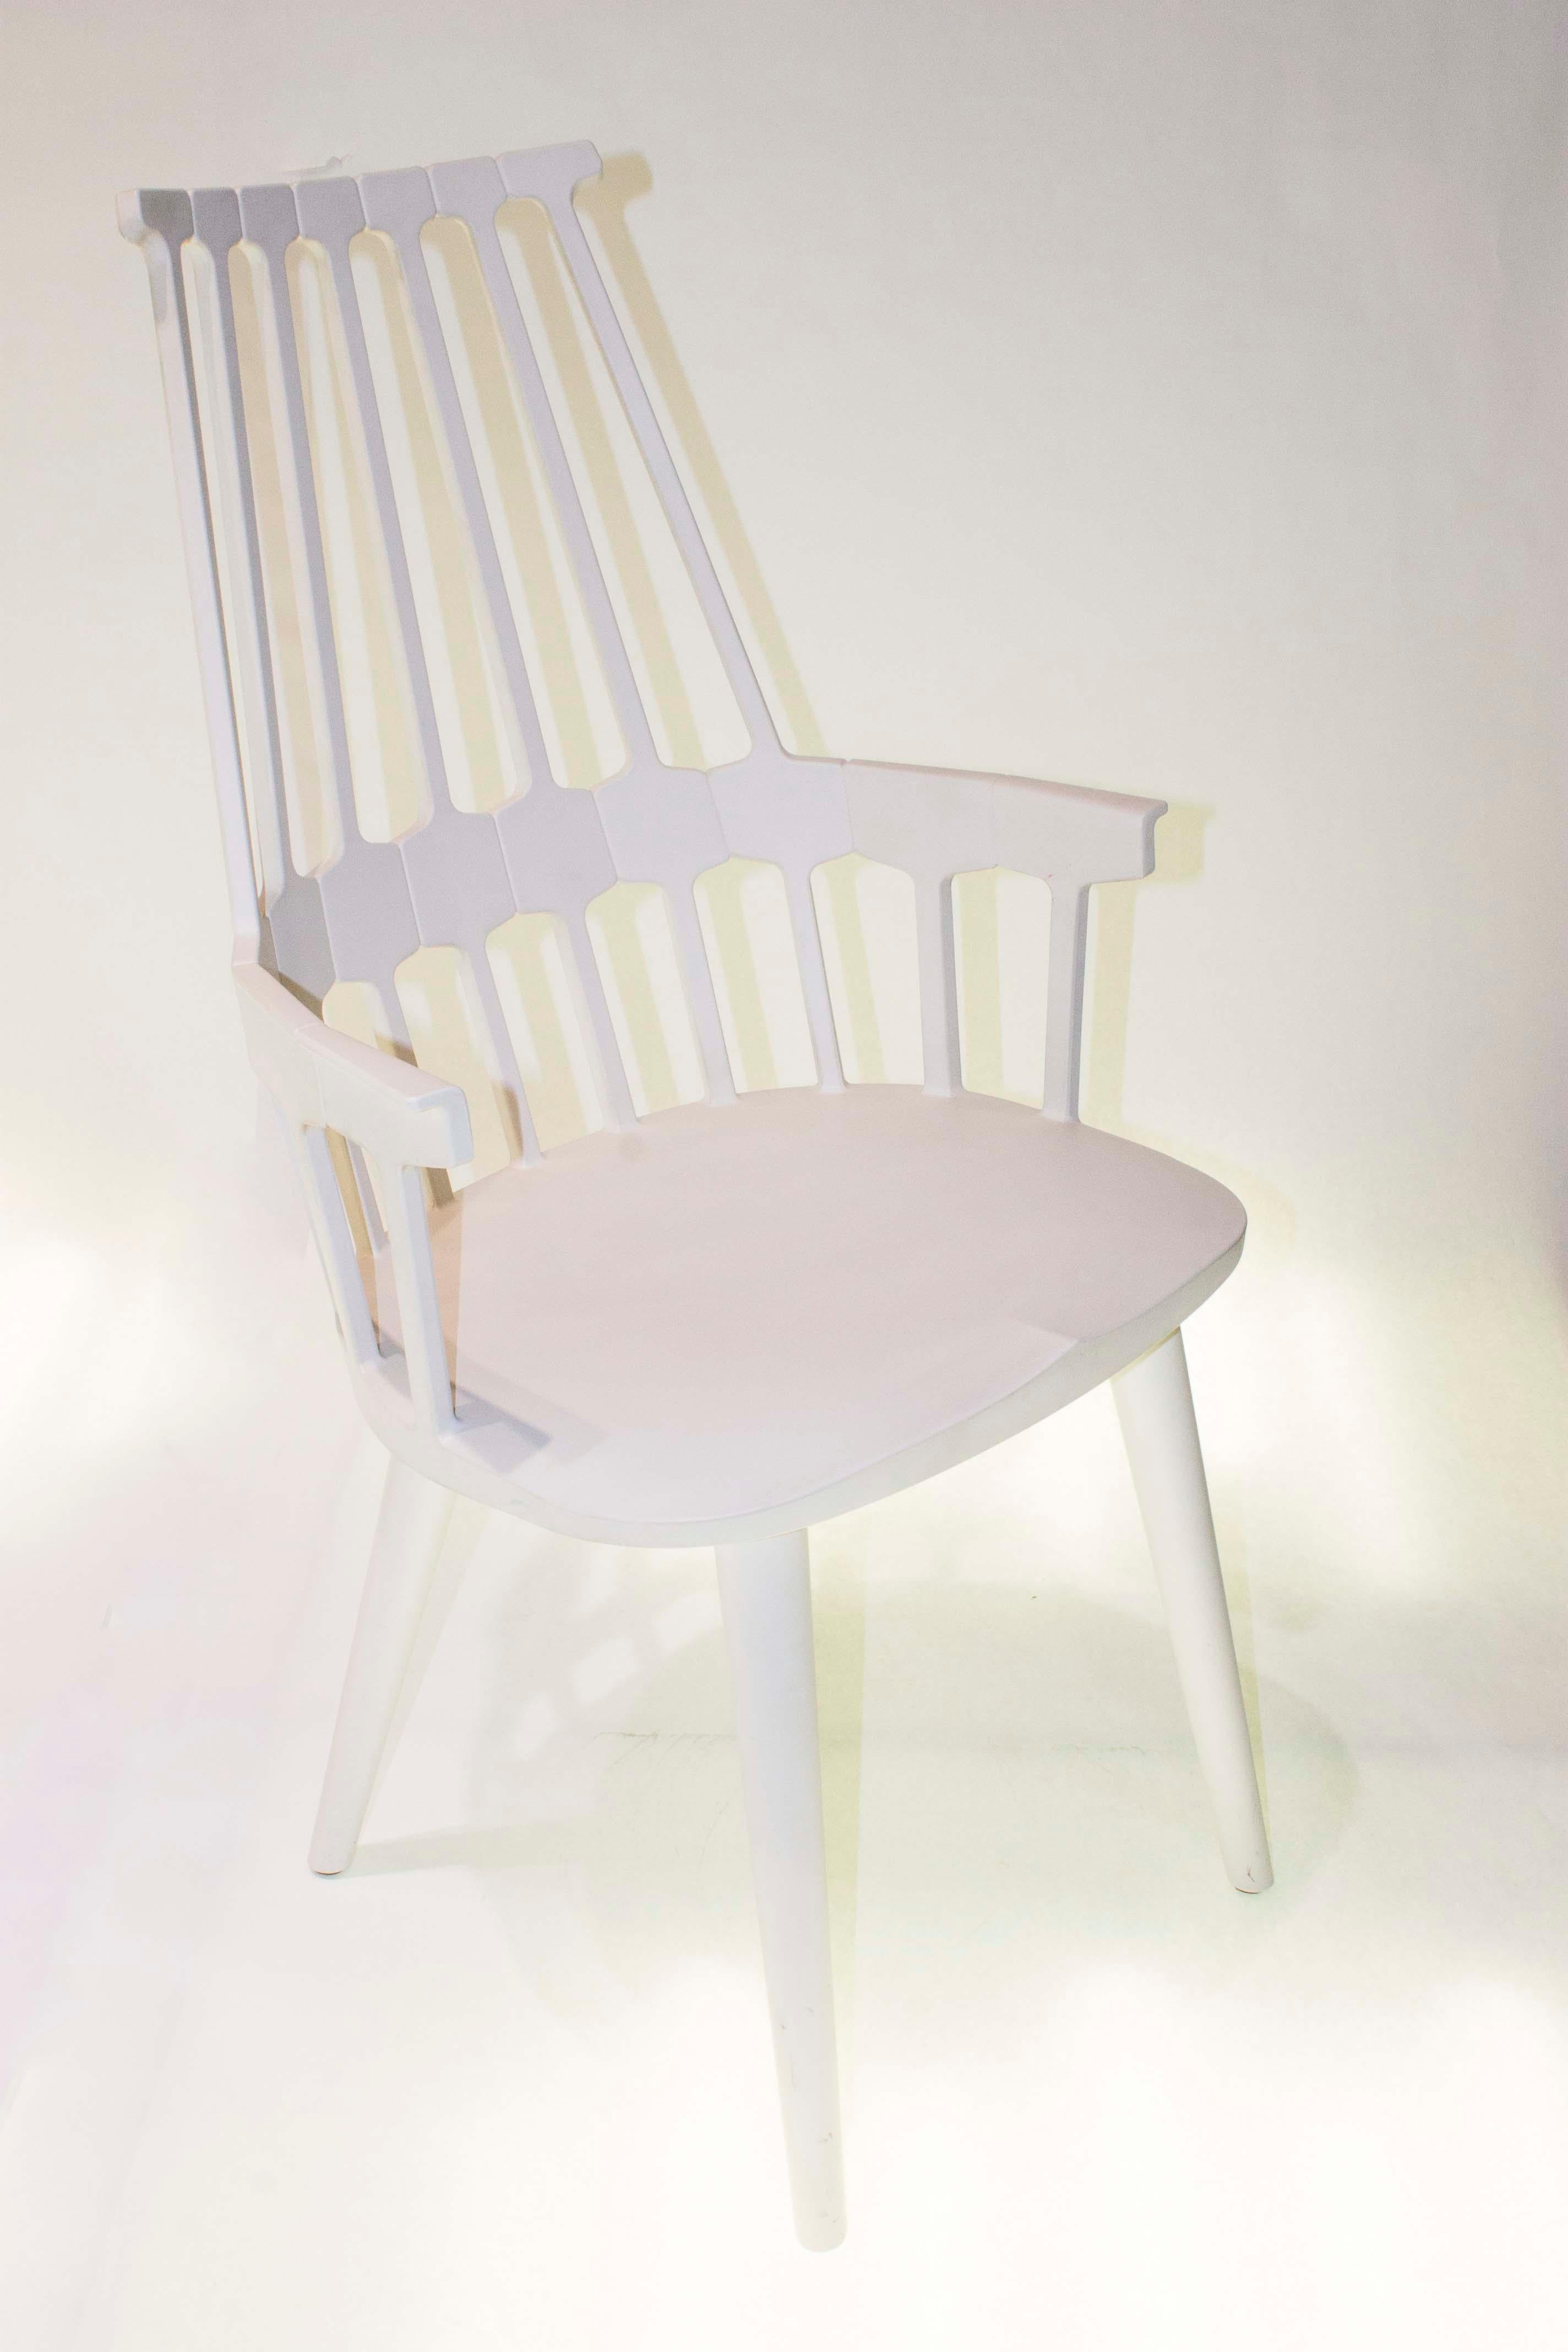 Italian Set of 2 Kartell Comback Chairs in White with White Legs by Patricia Urquiola